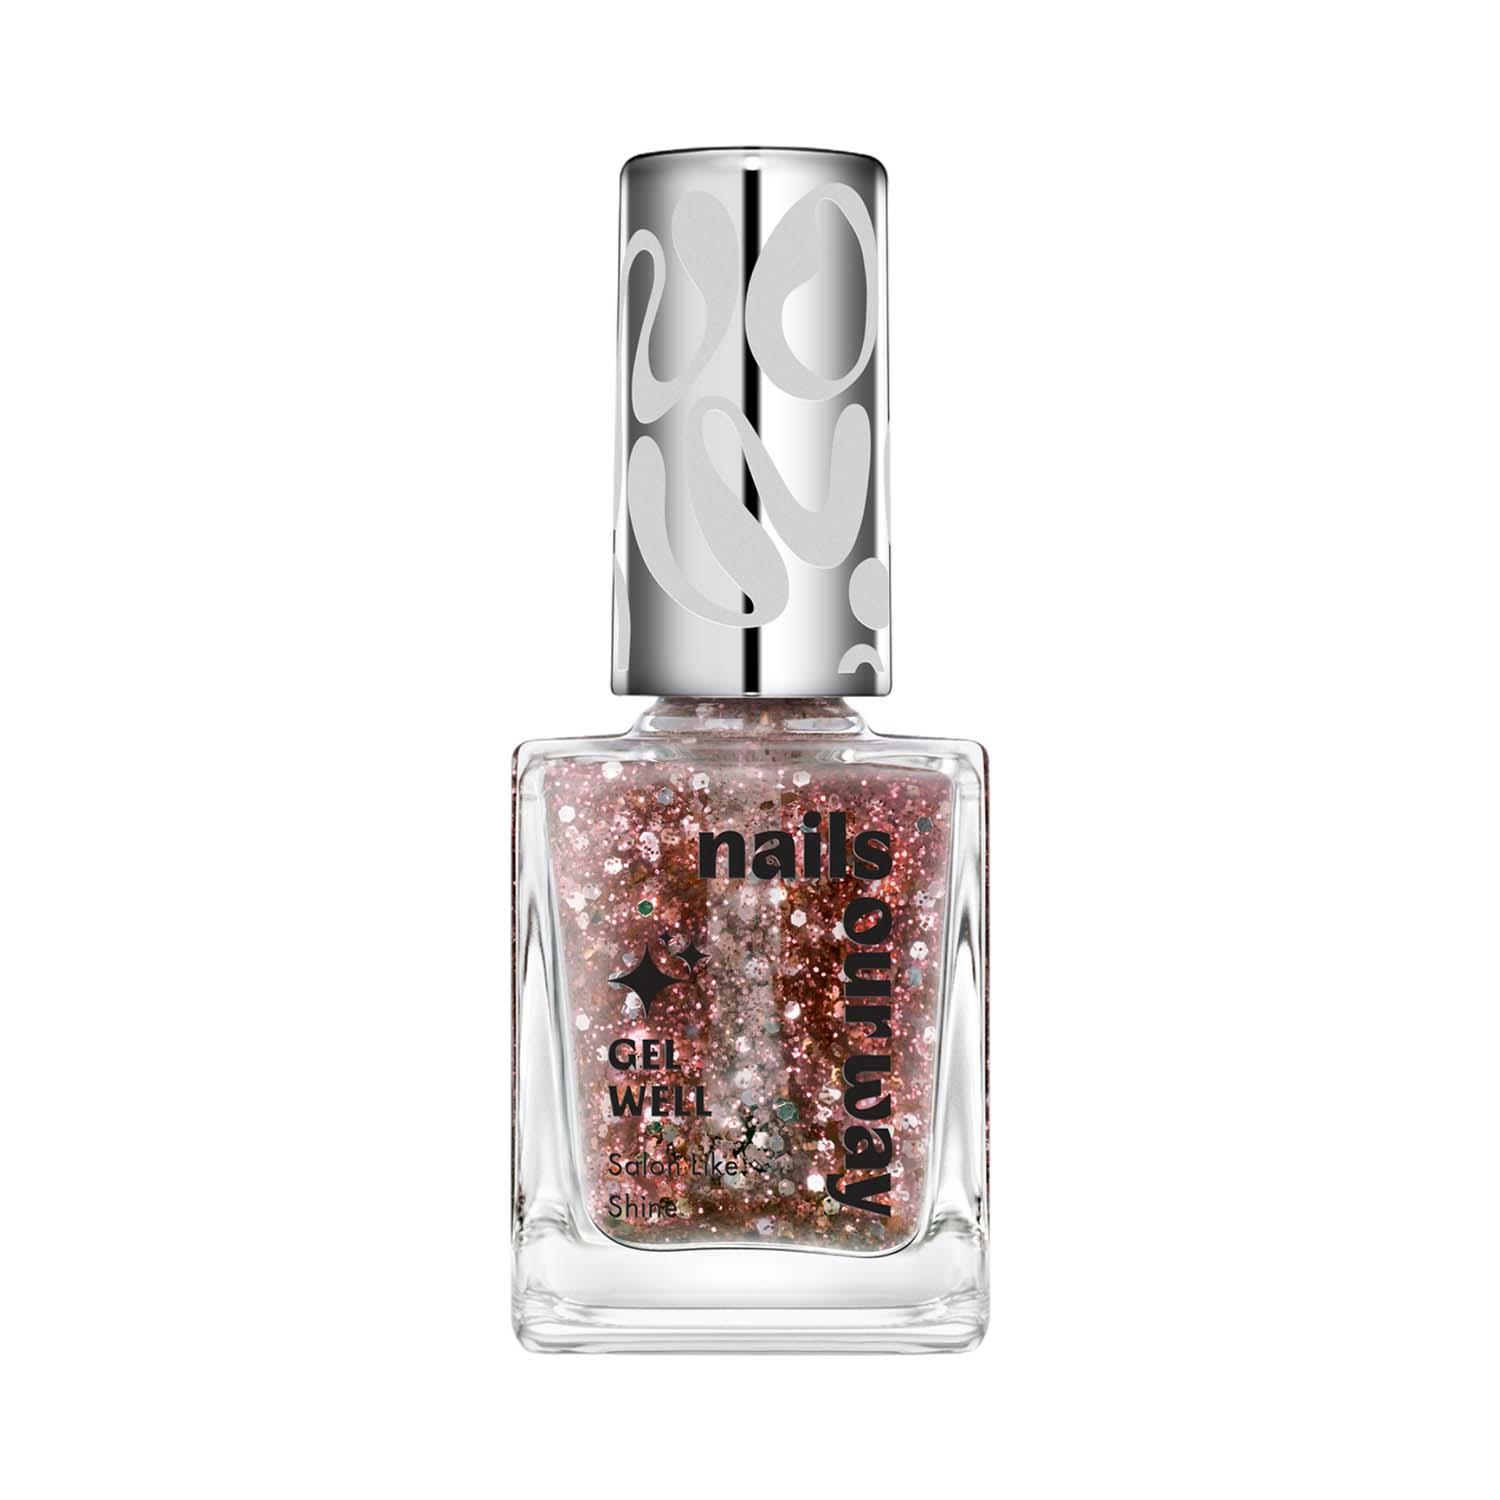 Nails Our Way | Nails Our Way Gel Well Nail Enamel - 507 Energetic (10 ml)